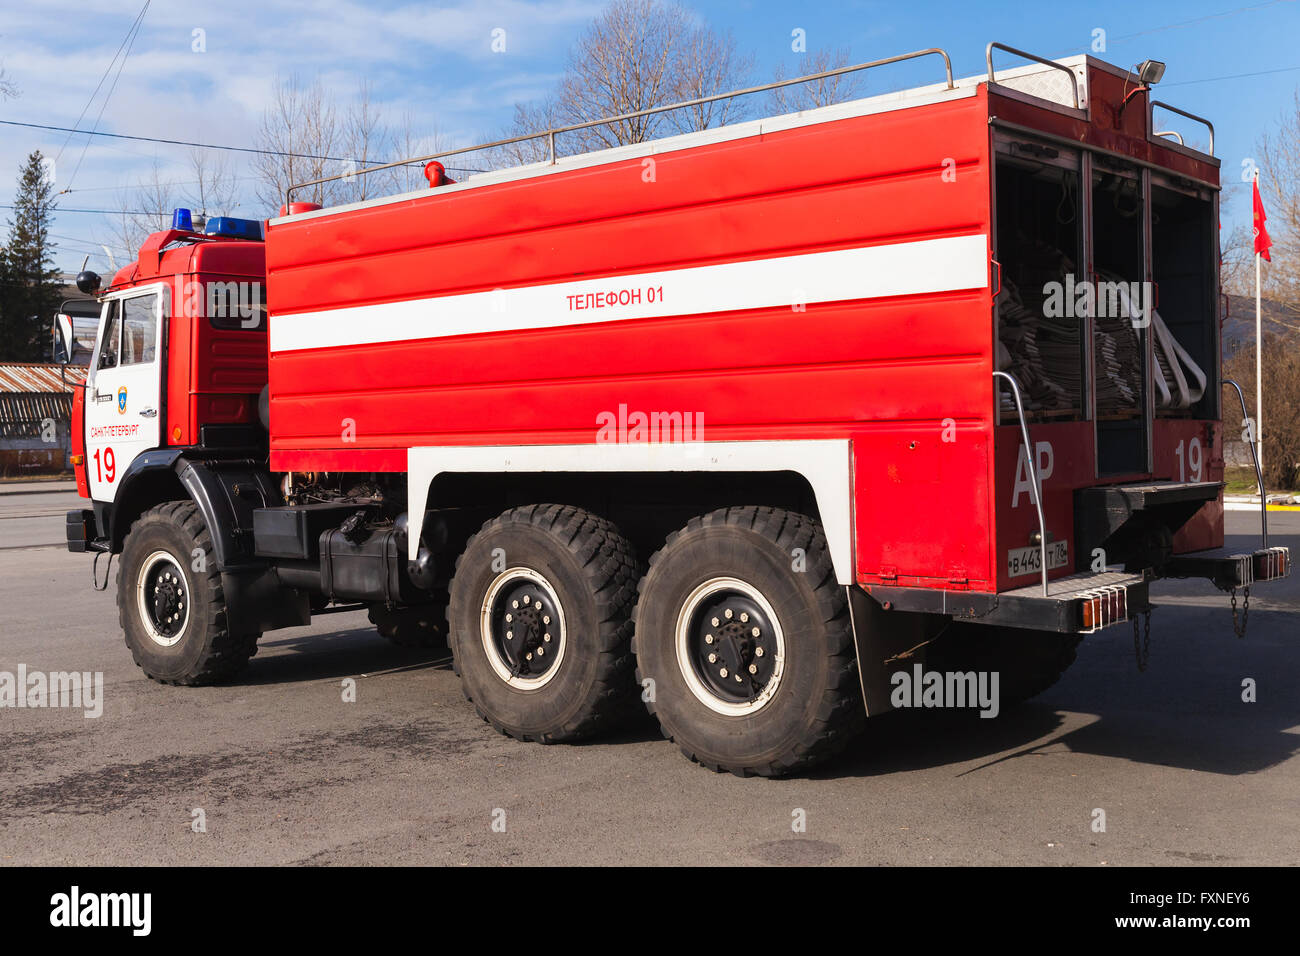 St. Petersburg, Russia - April 9, 2016: New red Kamaz 43253, Russian fire truck modification Stock Photo